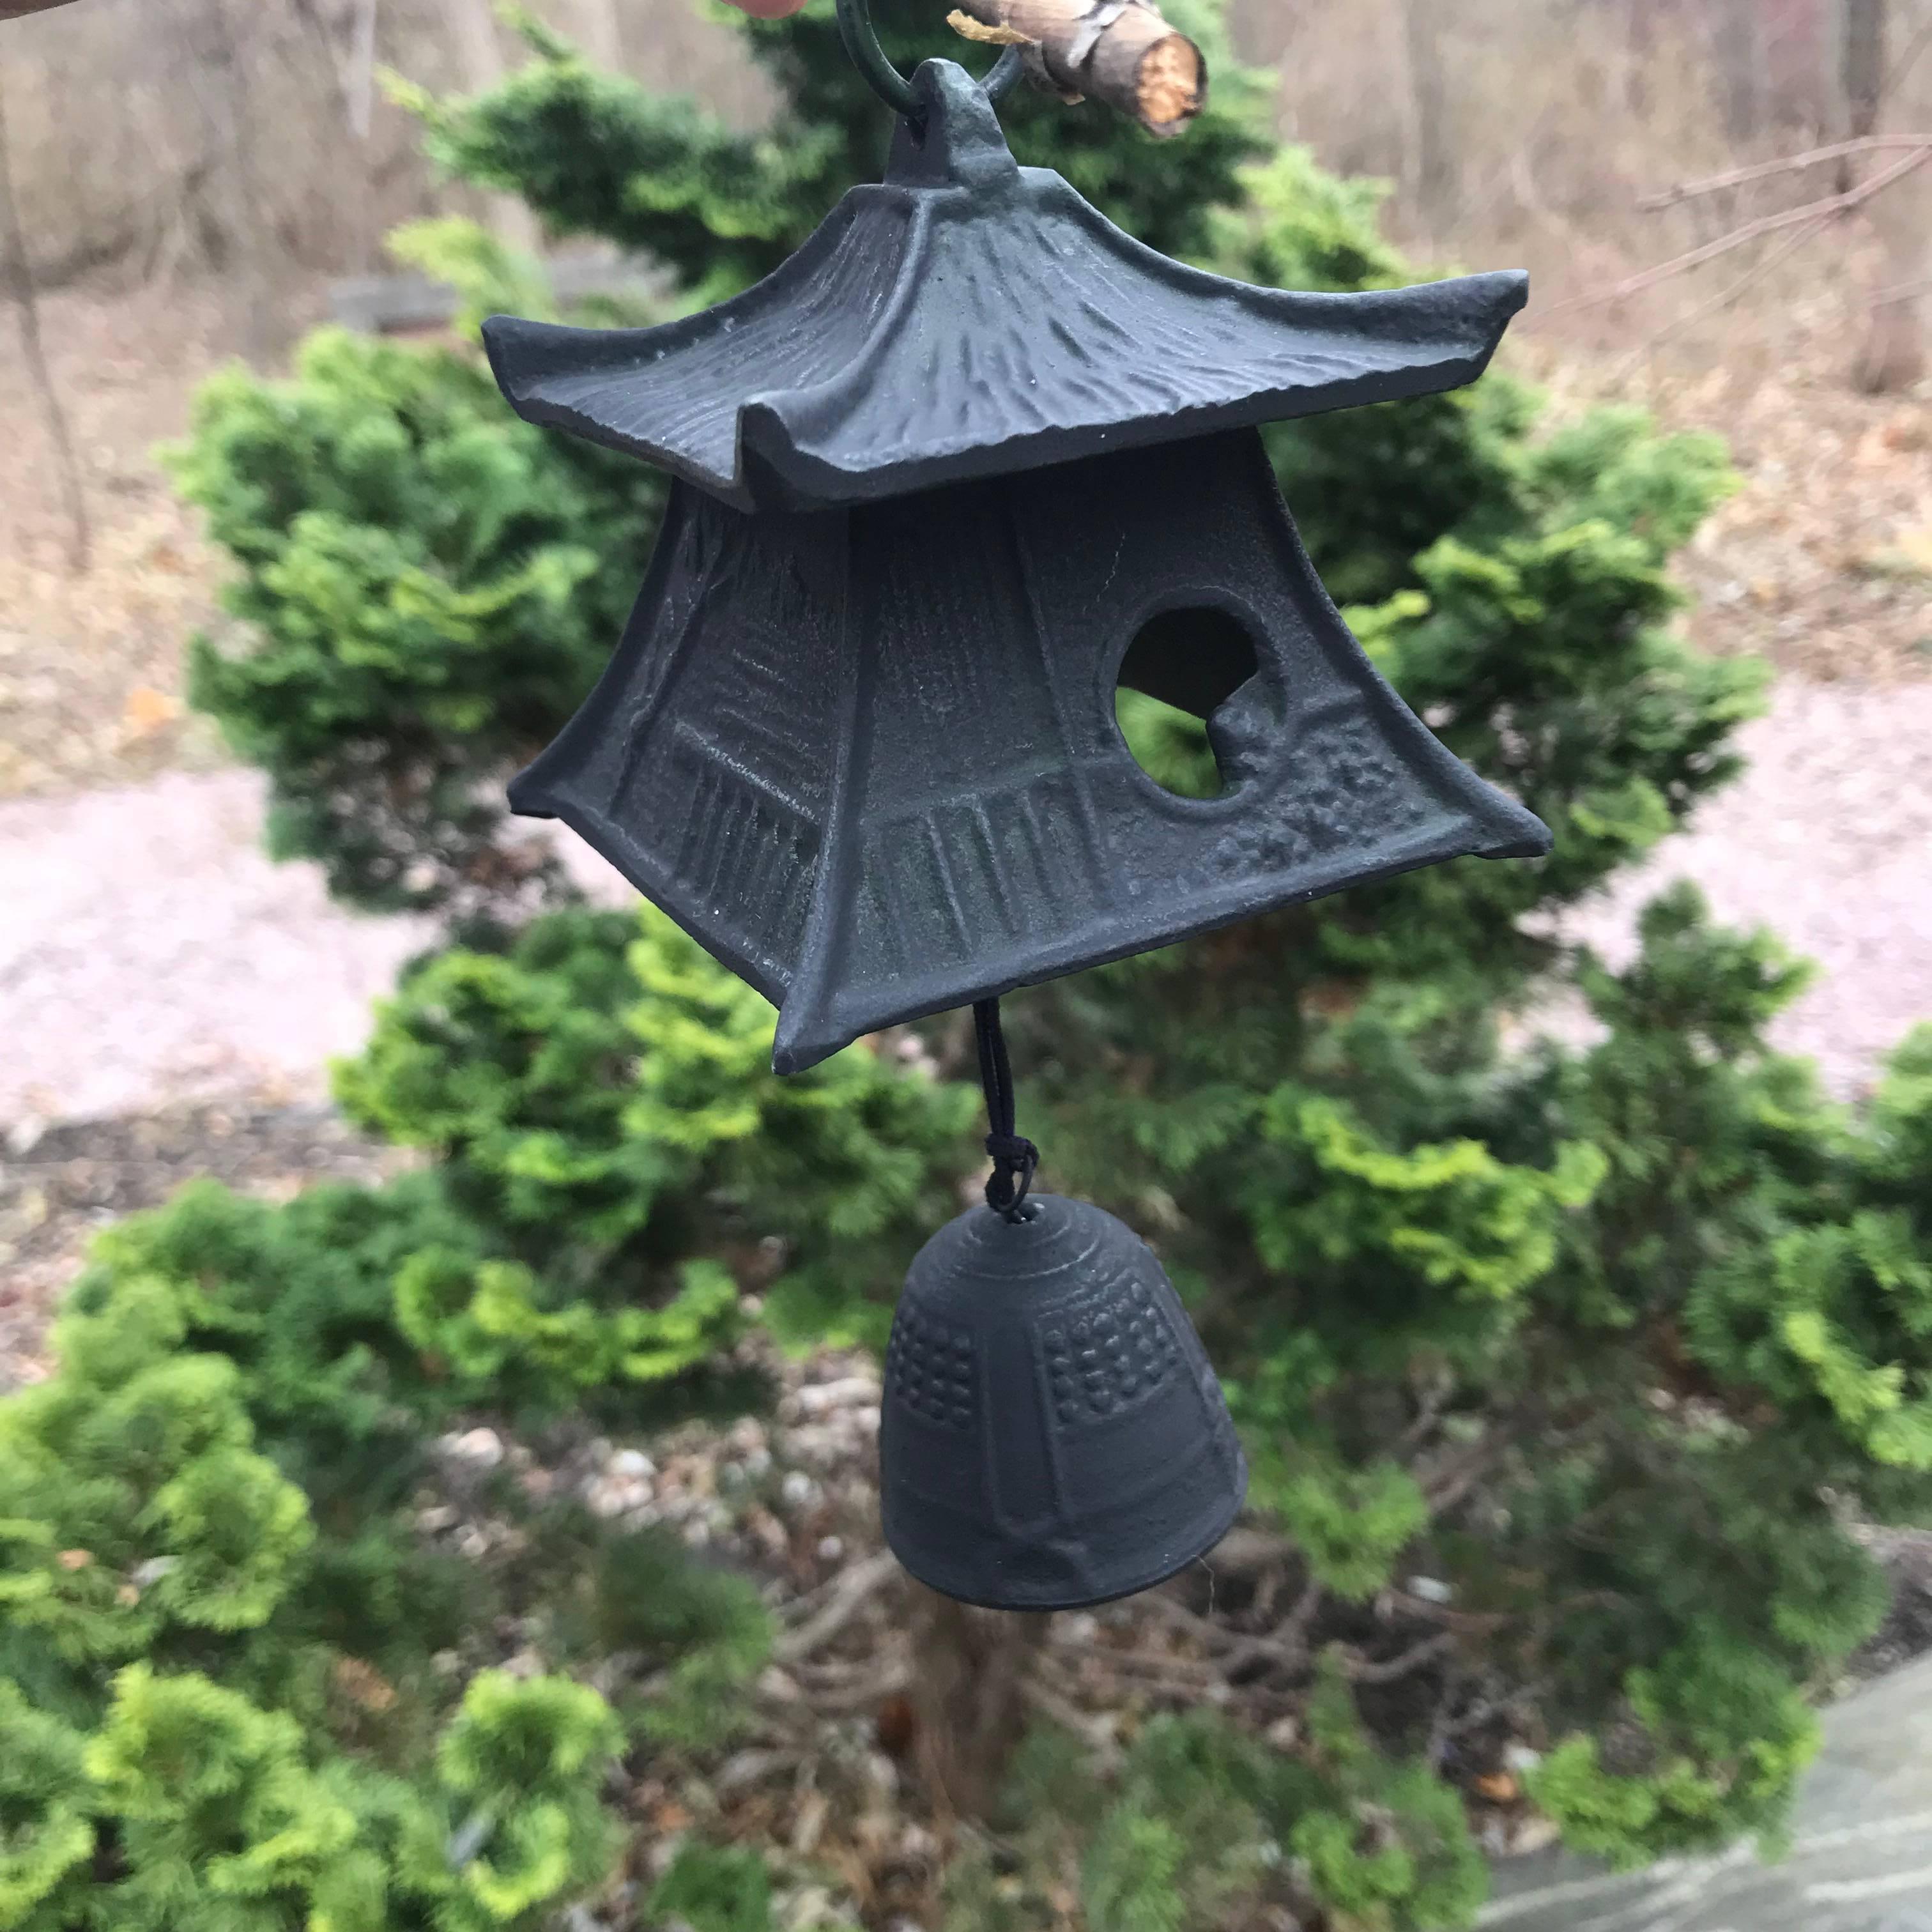 Japan, an unusual handcrafted ringing lantern or wind chime in the form of a Japanese mountain minka farm house that may be suspended in your favorite indoor or outdoor space.

The term 